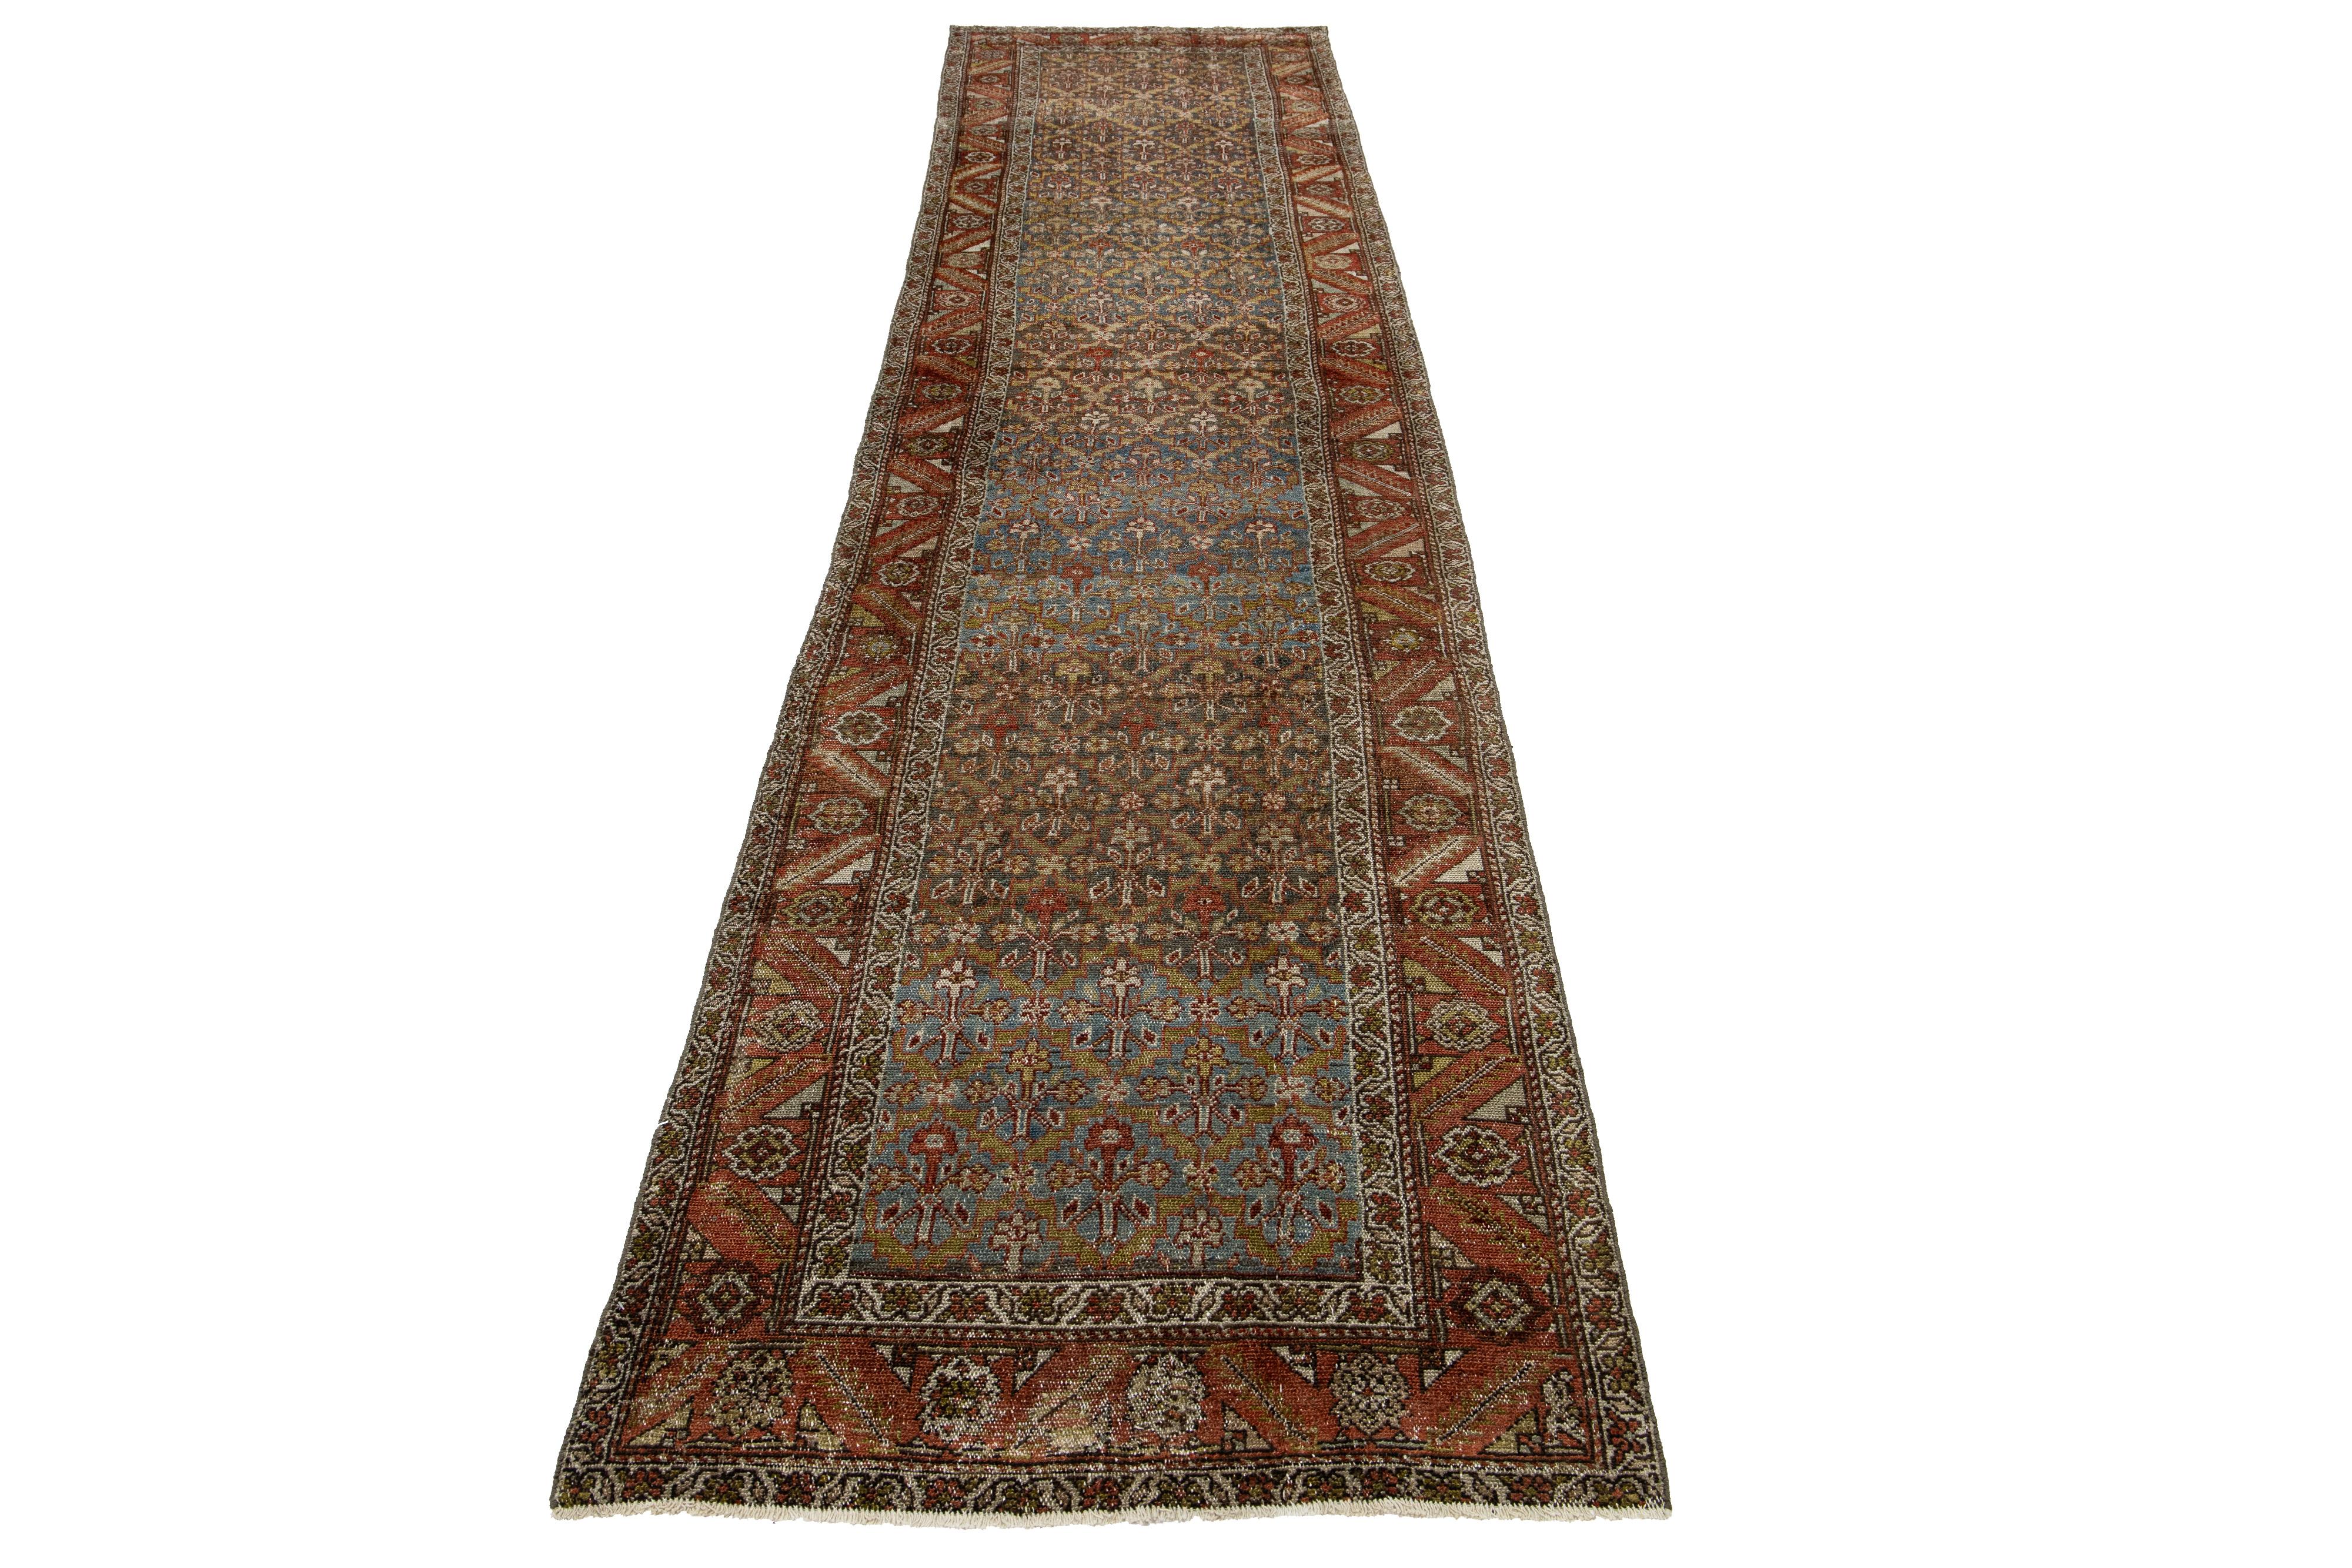 This Persian Malayer wool rug has an antique charm. It features hand-knotted wool in a blue field, with a tribal pattern adorned with rust, gray, and yellow accents.

This rug measures 3'2